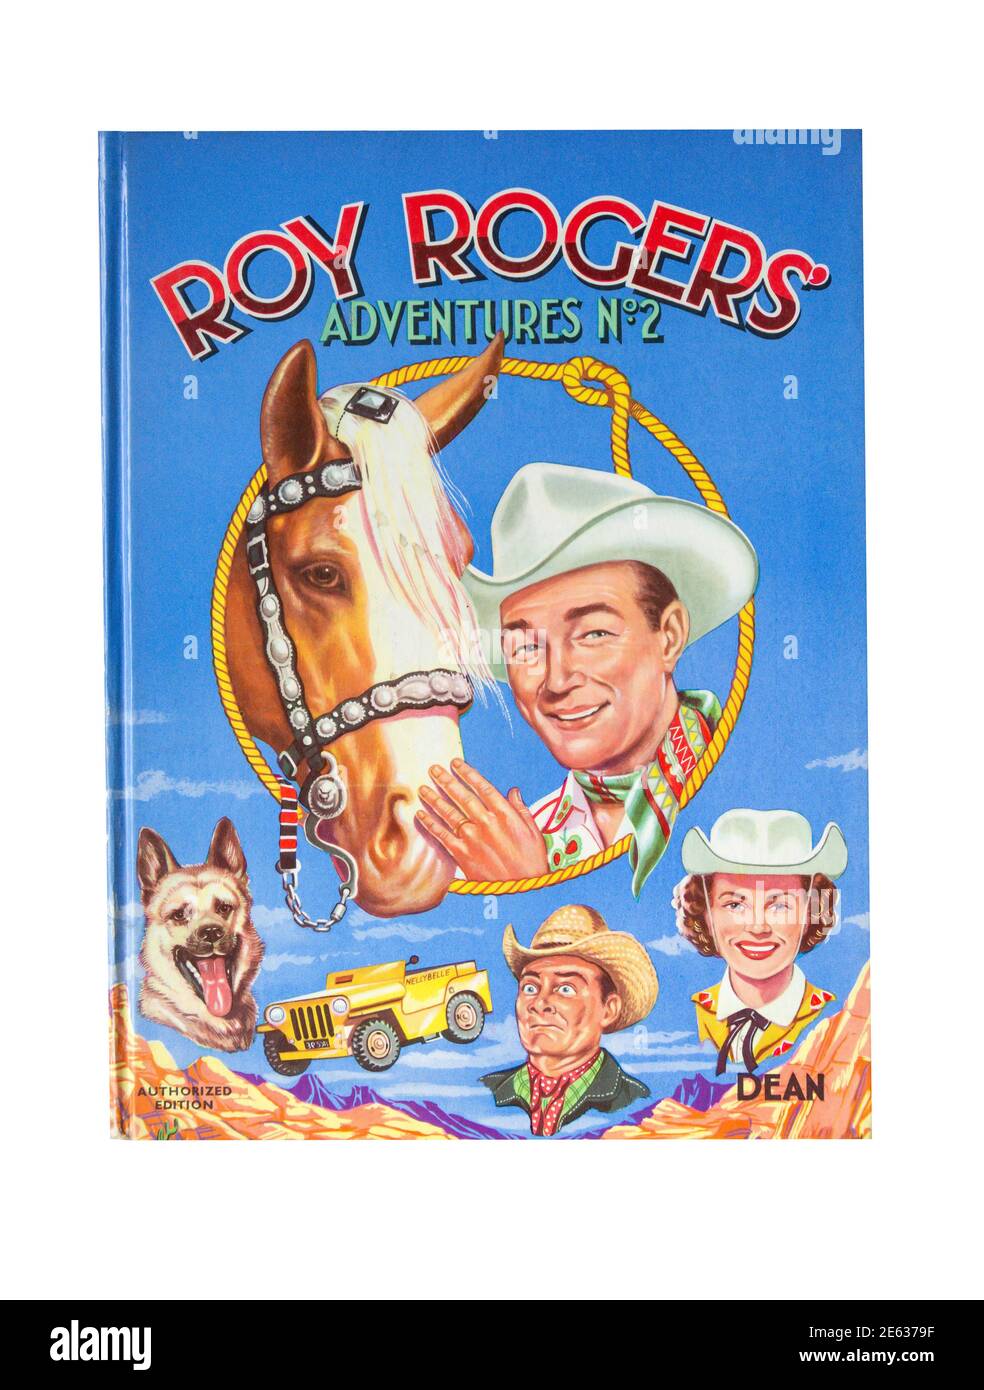 Roy rogers Cut Out Stock Images & Pictures - Alamy